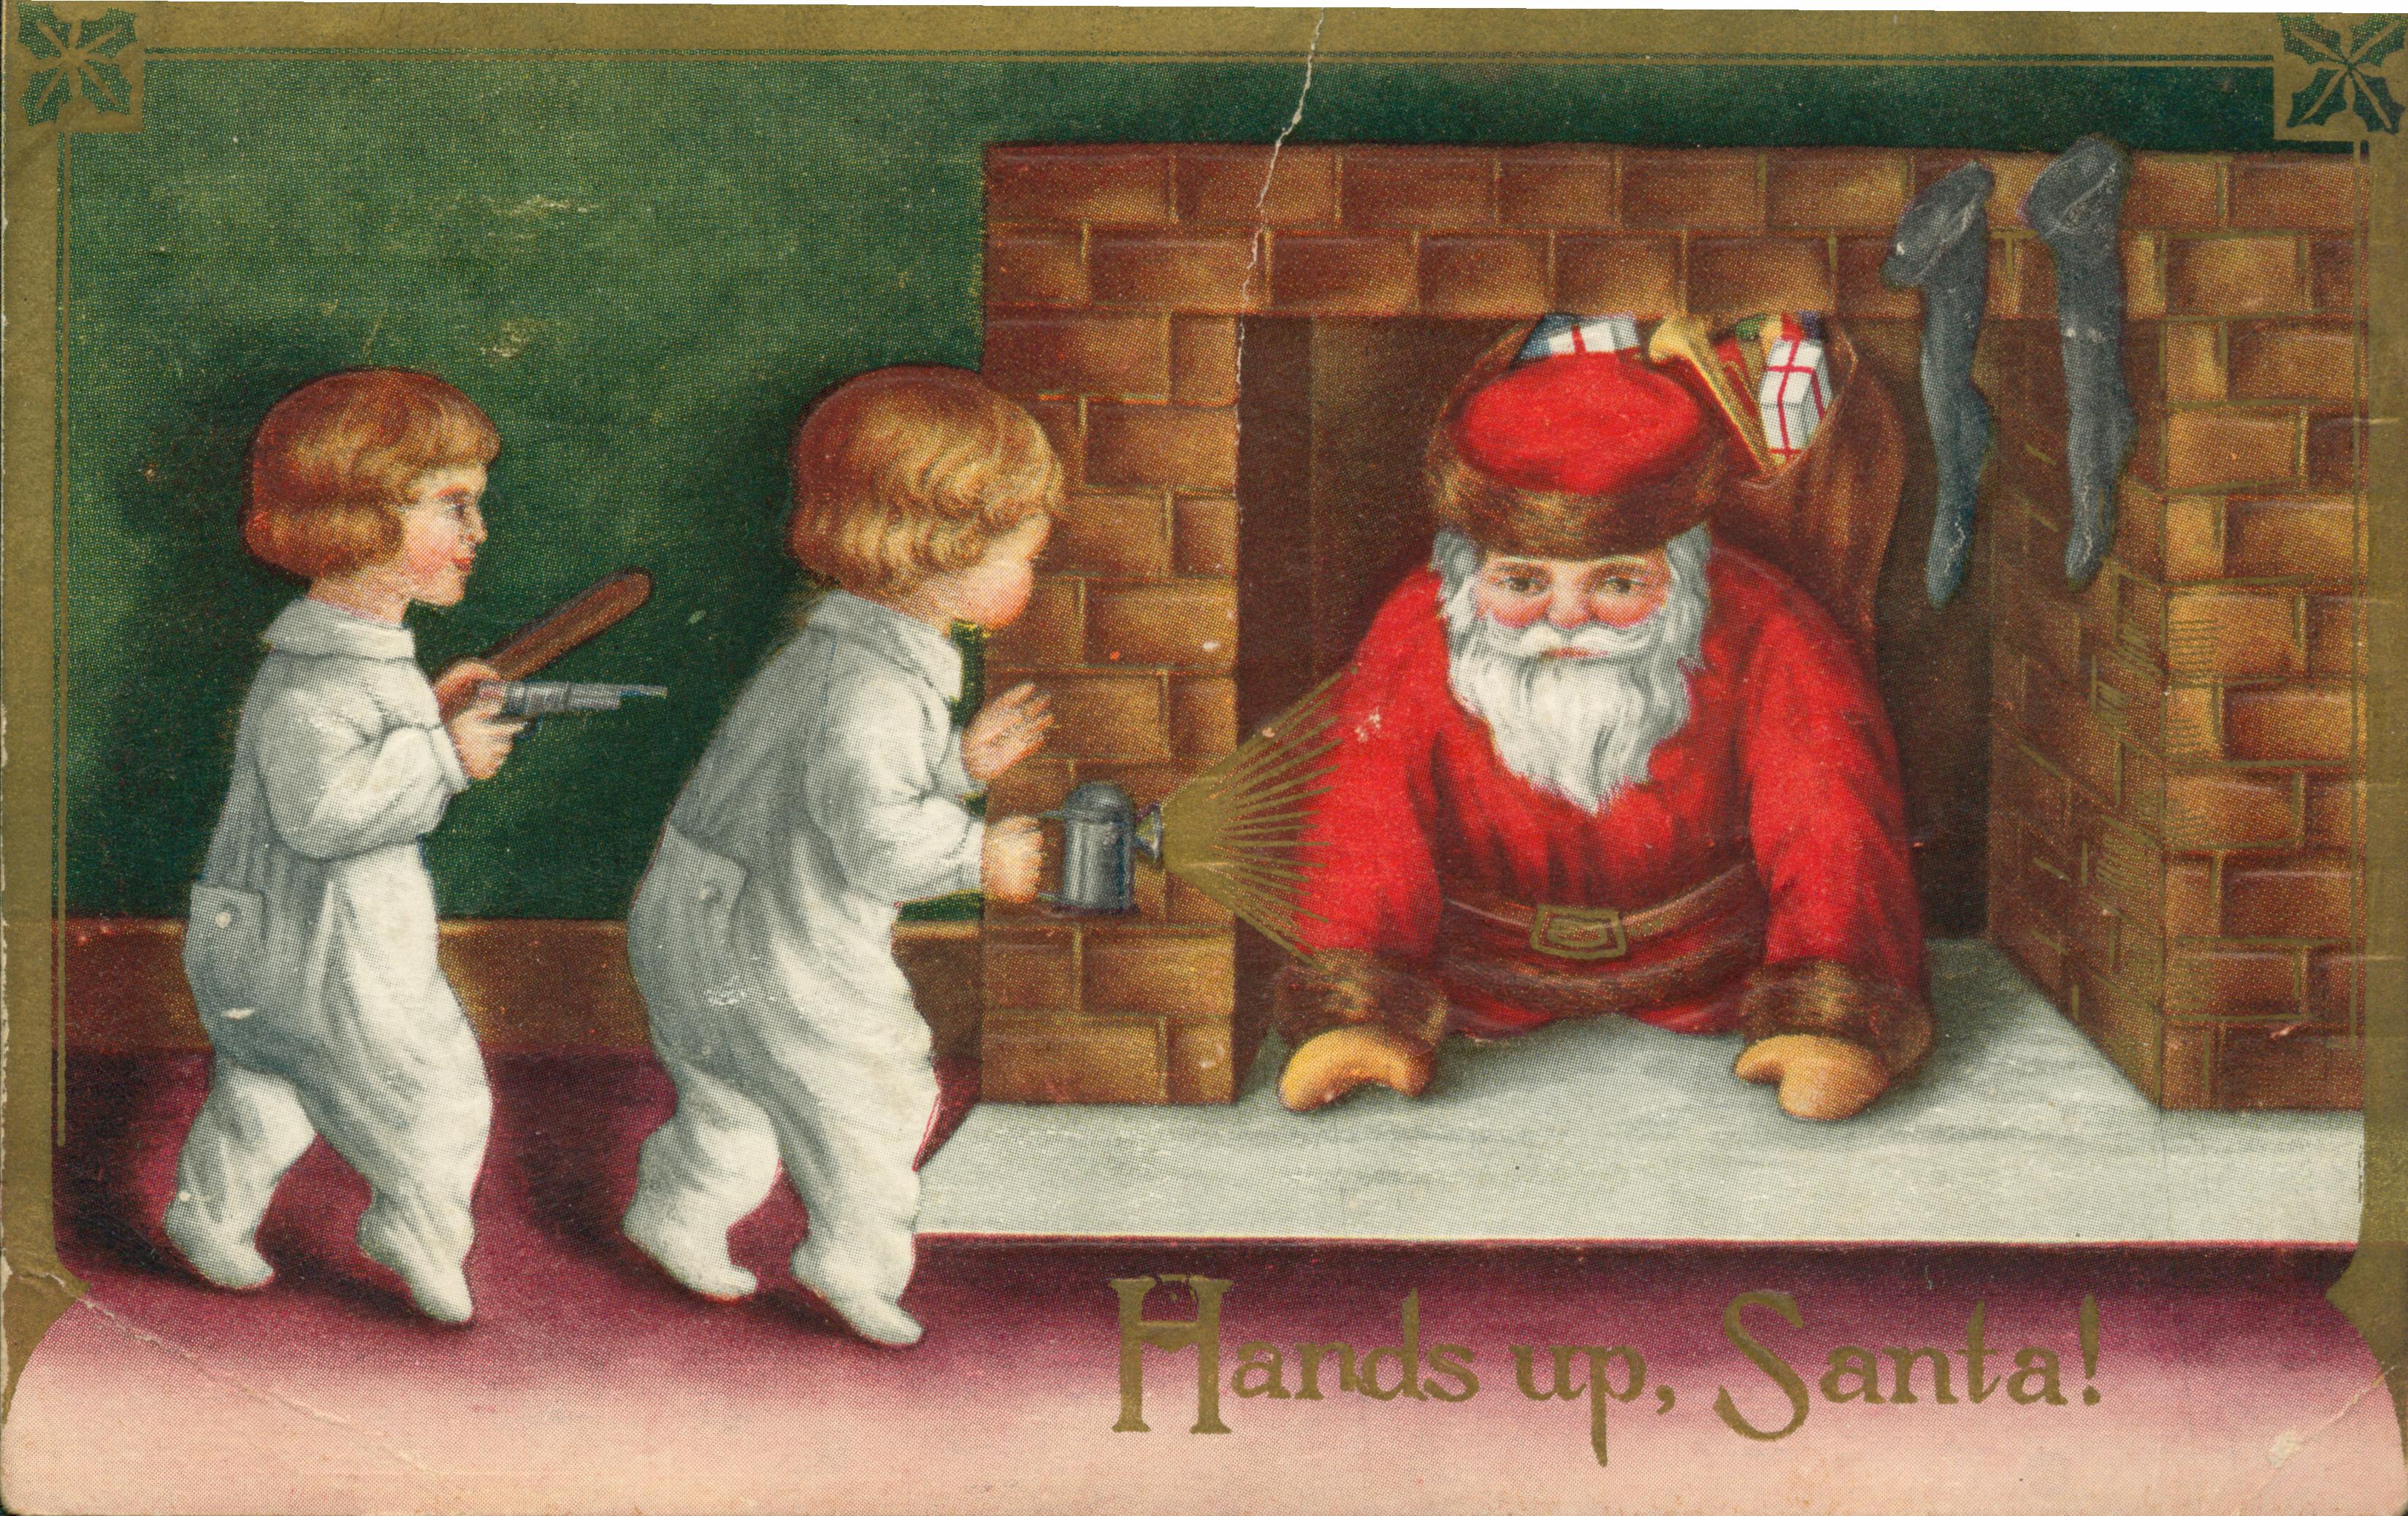 Shows a Santa Claus emerging from a chimney while two children confront him with a flashlight and a gun